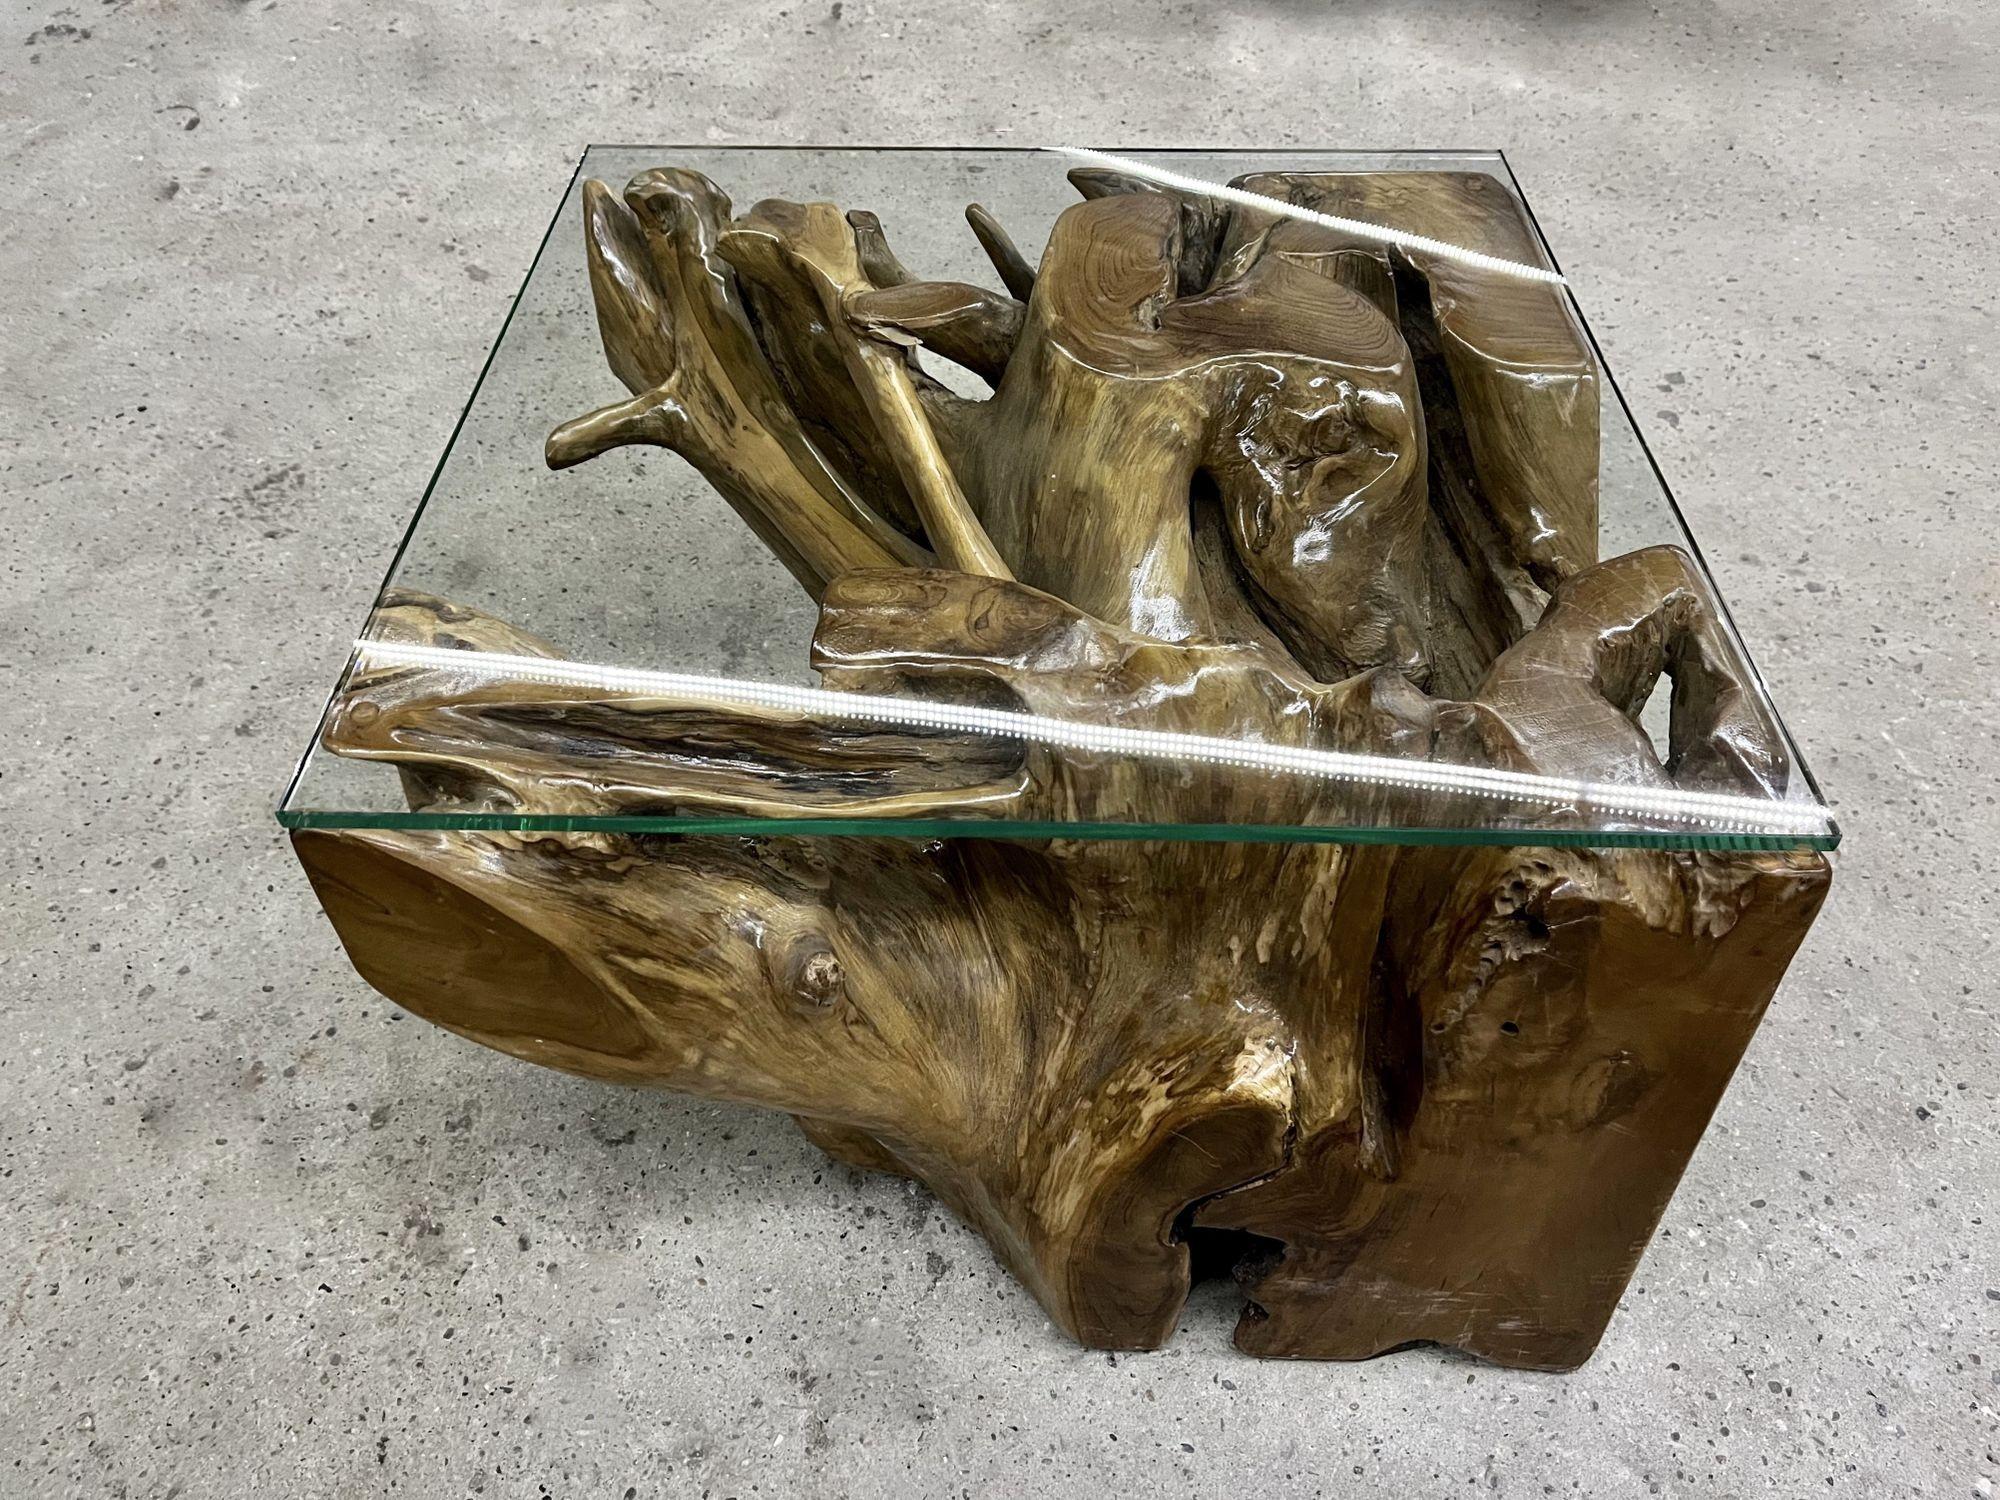 Organic modern teak root side table or coffee table elaborately handcrafted by a very talented artist. A one of a kind piece of an organic style side table, cutted out of a huge teak root. This absolutley eye-catching, natural 